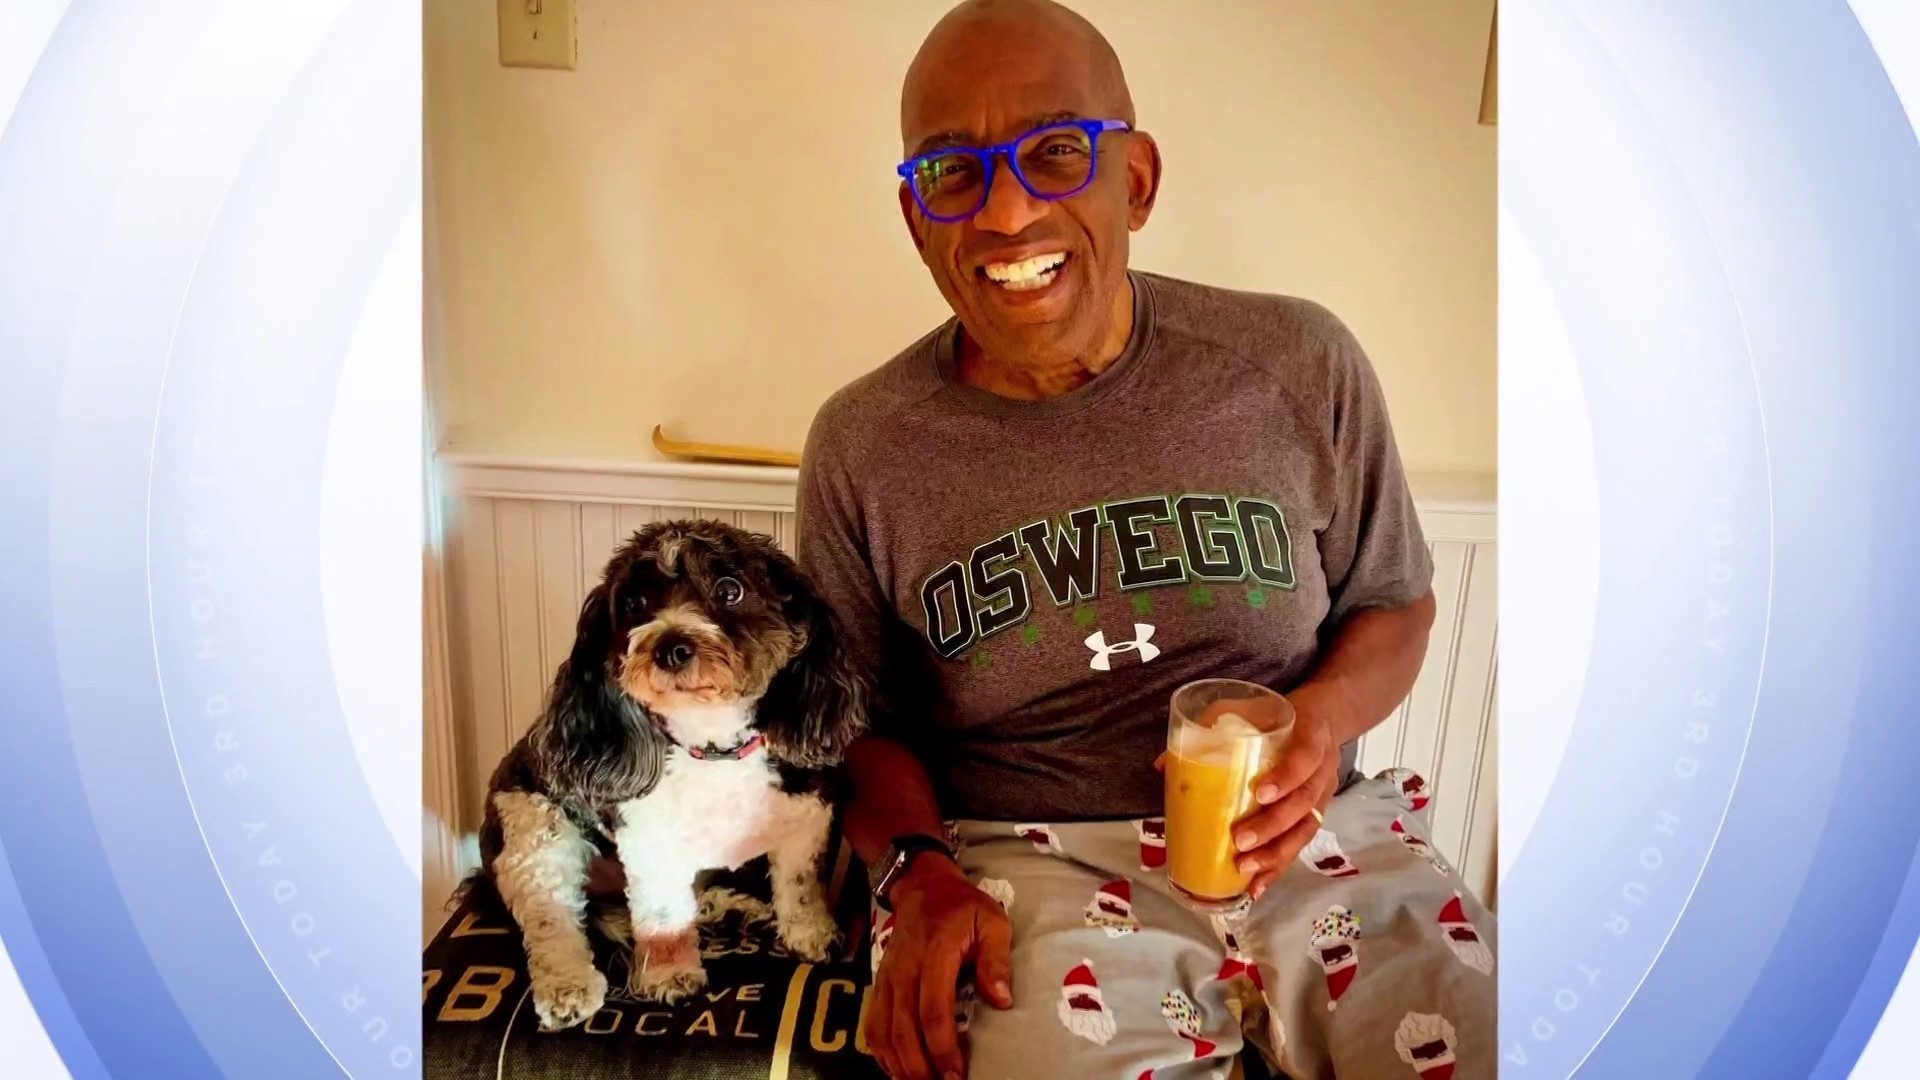 Al Roker on the passing of beloved dog: She was a gift for 12 years